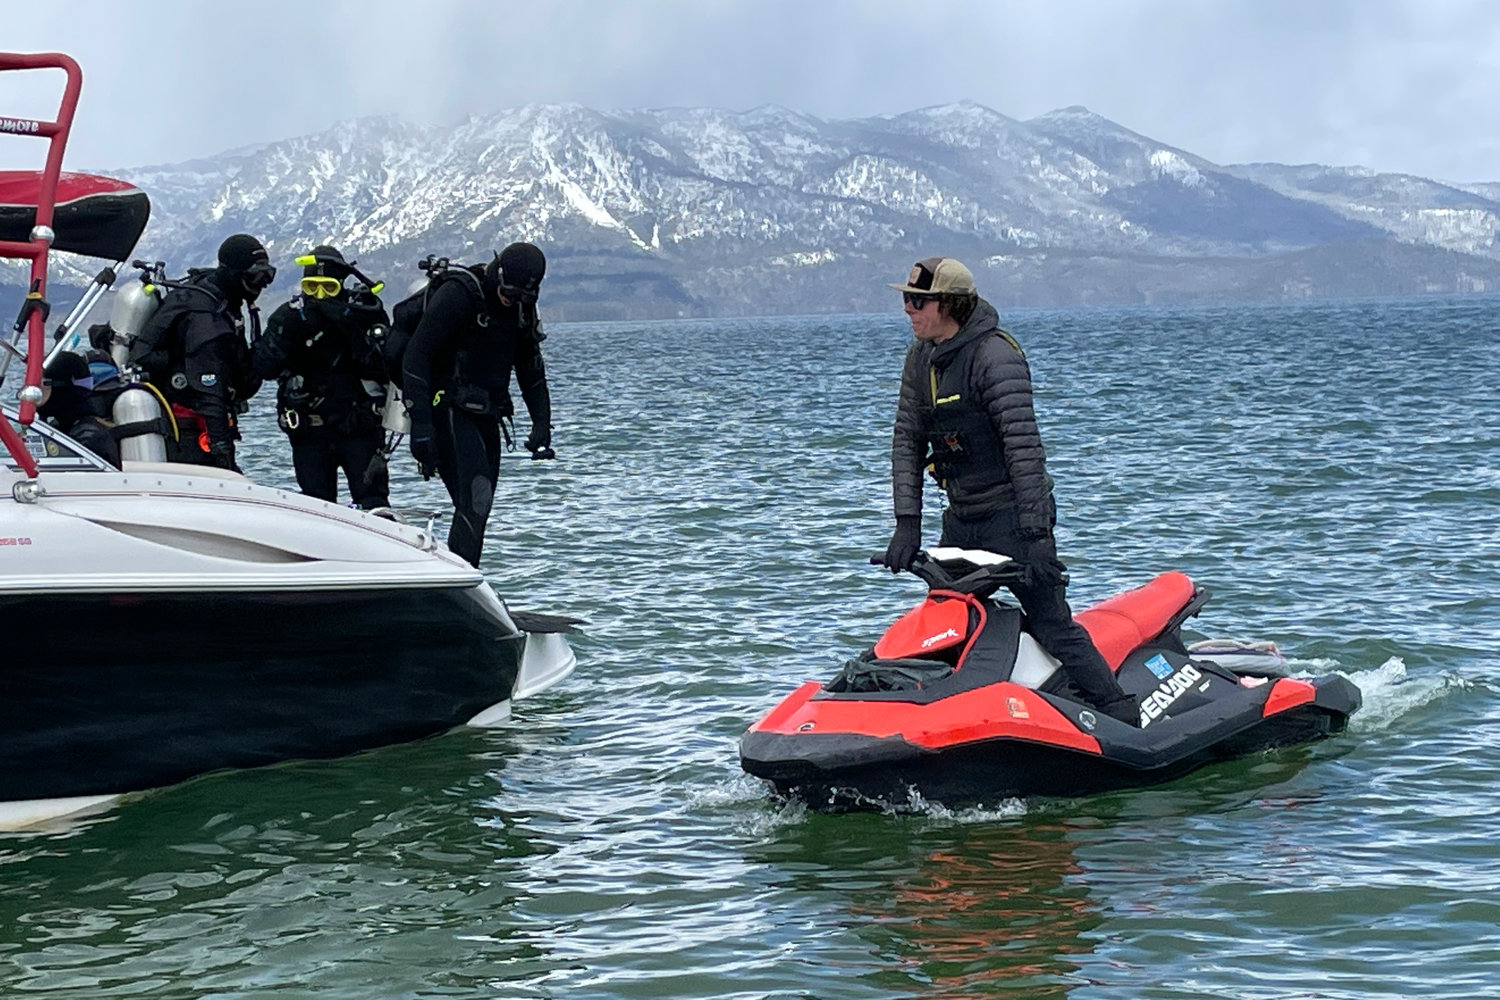 Divers prepare to enter the water at the end of the year-long Lake Tahoe cleanup in Stateline, Nev., Tuesday, May 10, 2022. They found no trace of a mythical sea monster, no sign of mobsters in cement shoes or long-lost treasure chests. But scuba divers who spent the past year cleaning up Lake Tahoe's entire 72-mile (115-kilometer) shoreline have come away with what they hope will prove much more valuable: tons and tons of trash. (AP Photo/Haven Daley)